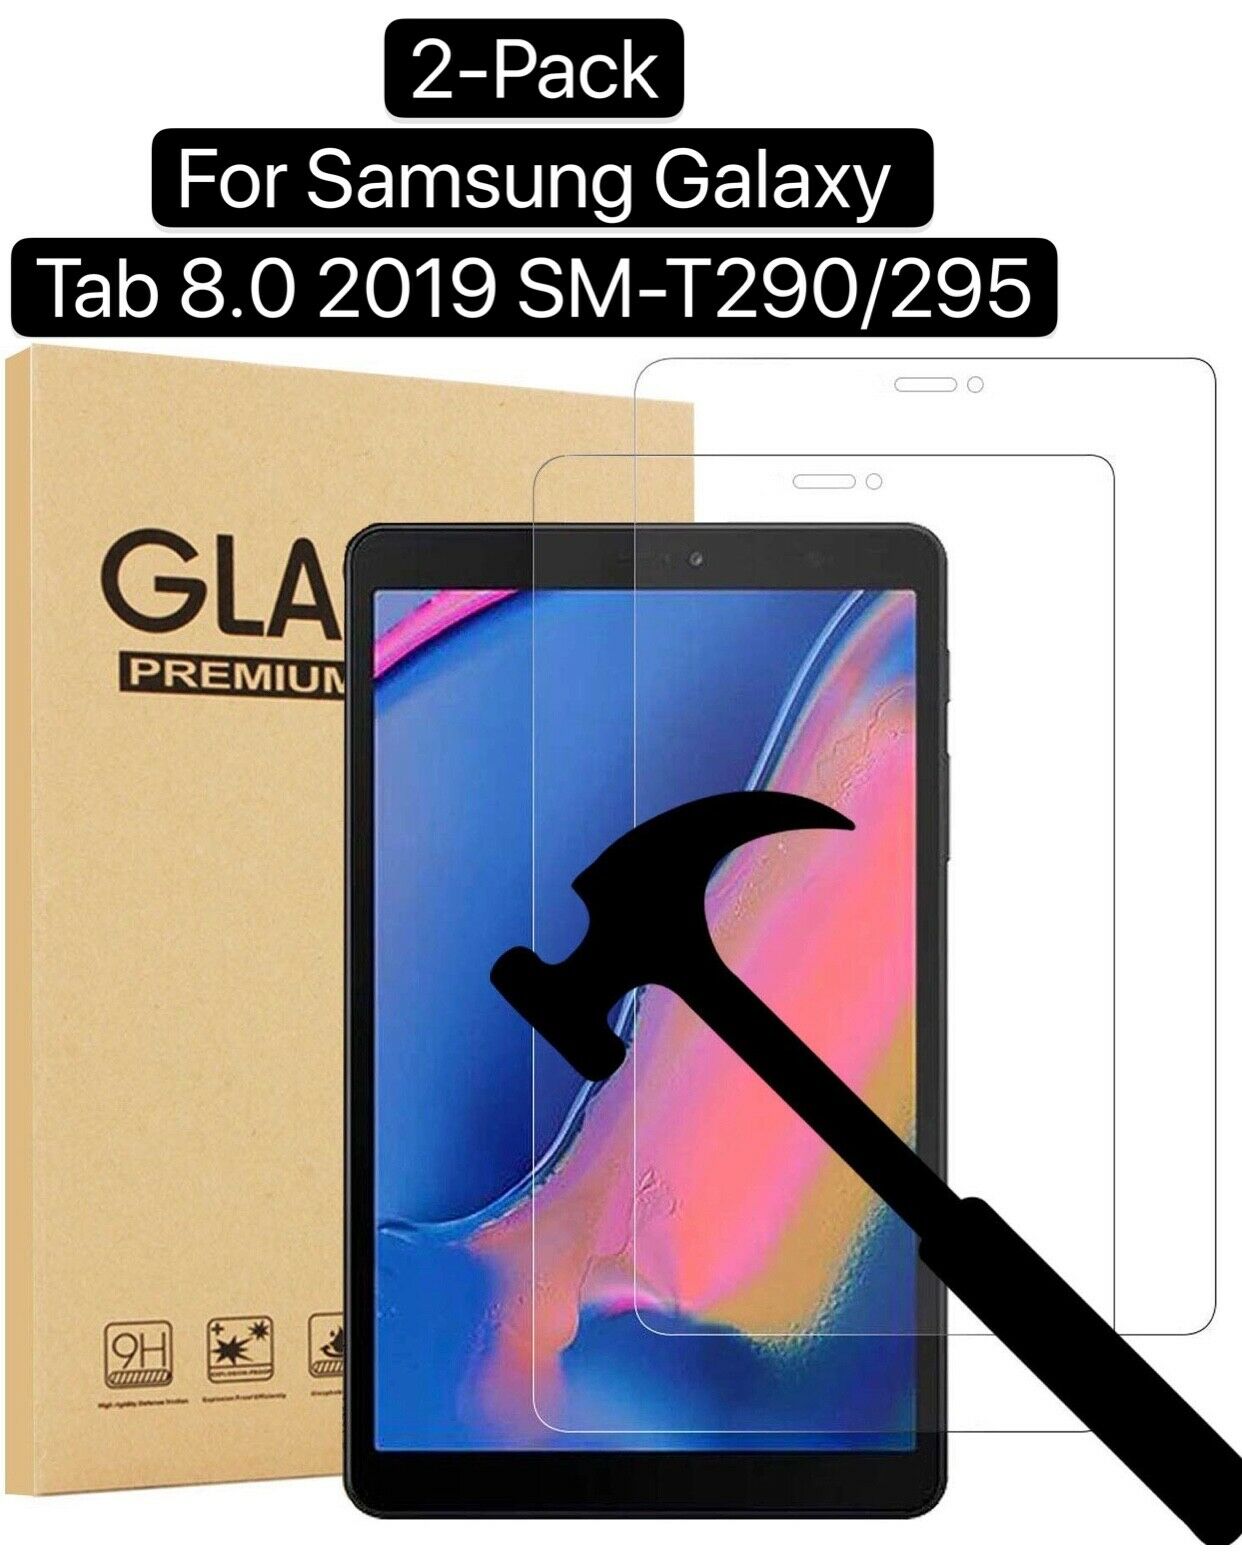 2pack Tempered Glass Screen Protector For Samsung Galaxy Tab A 8.0 " T290/t295